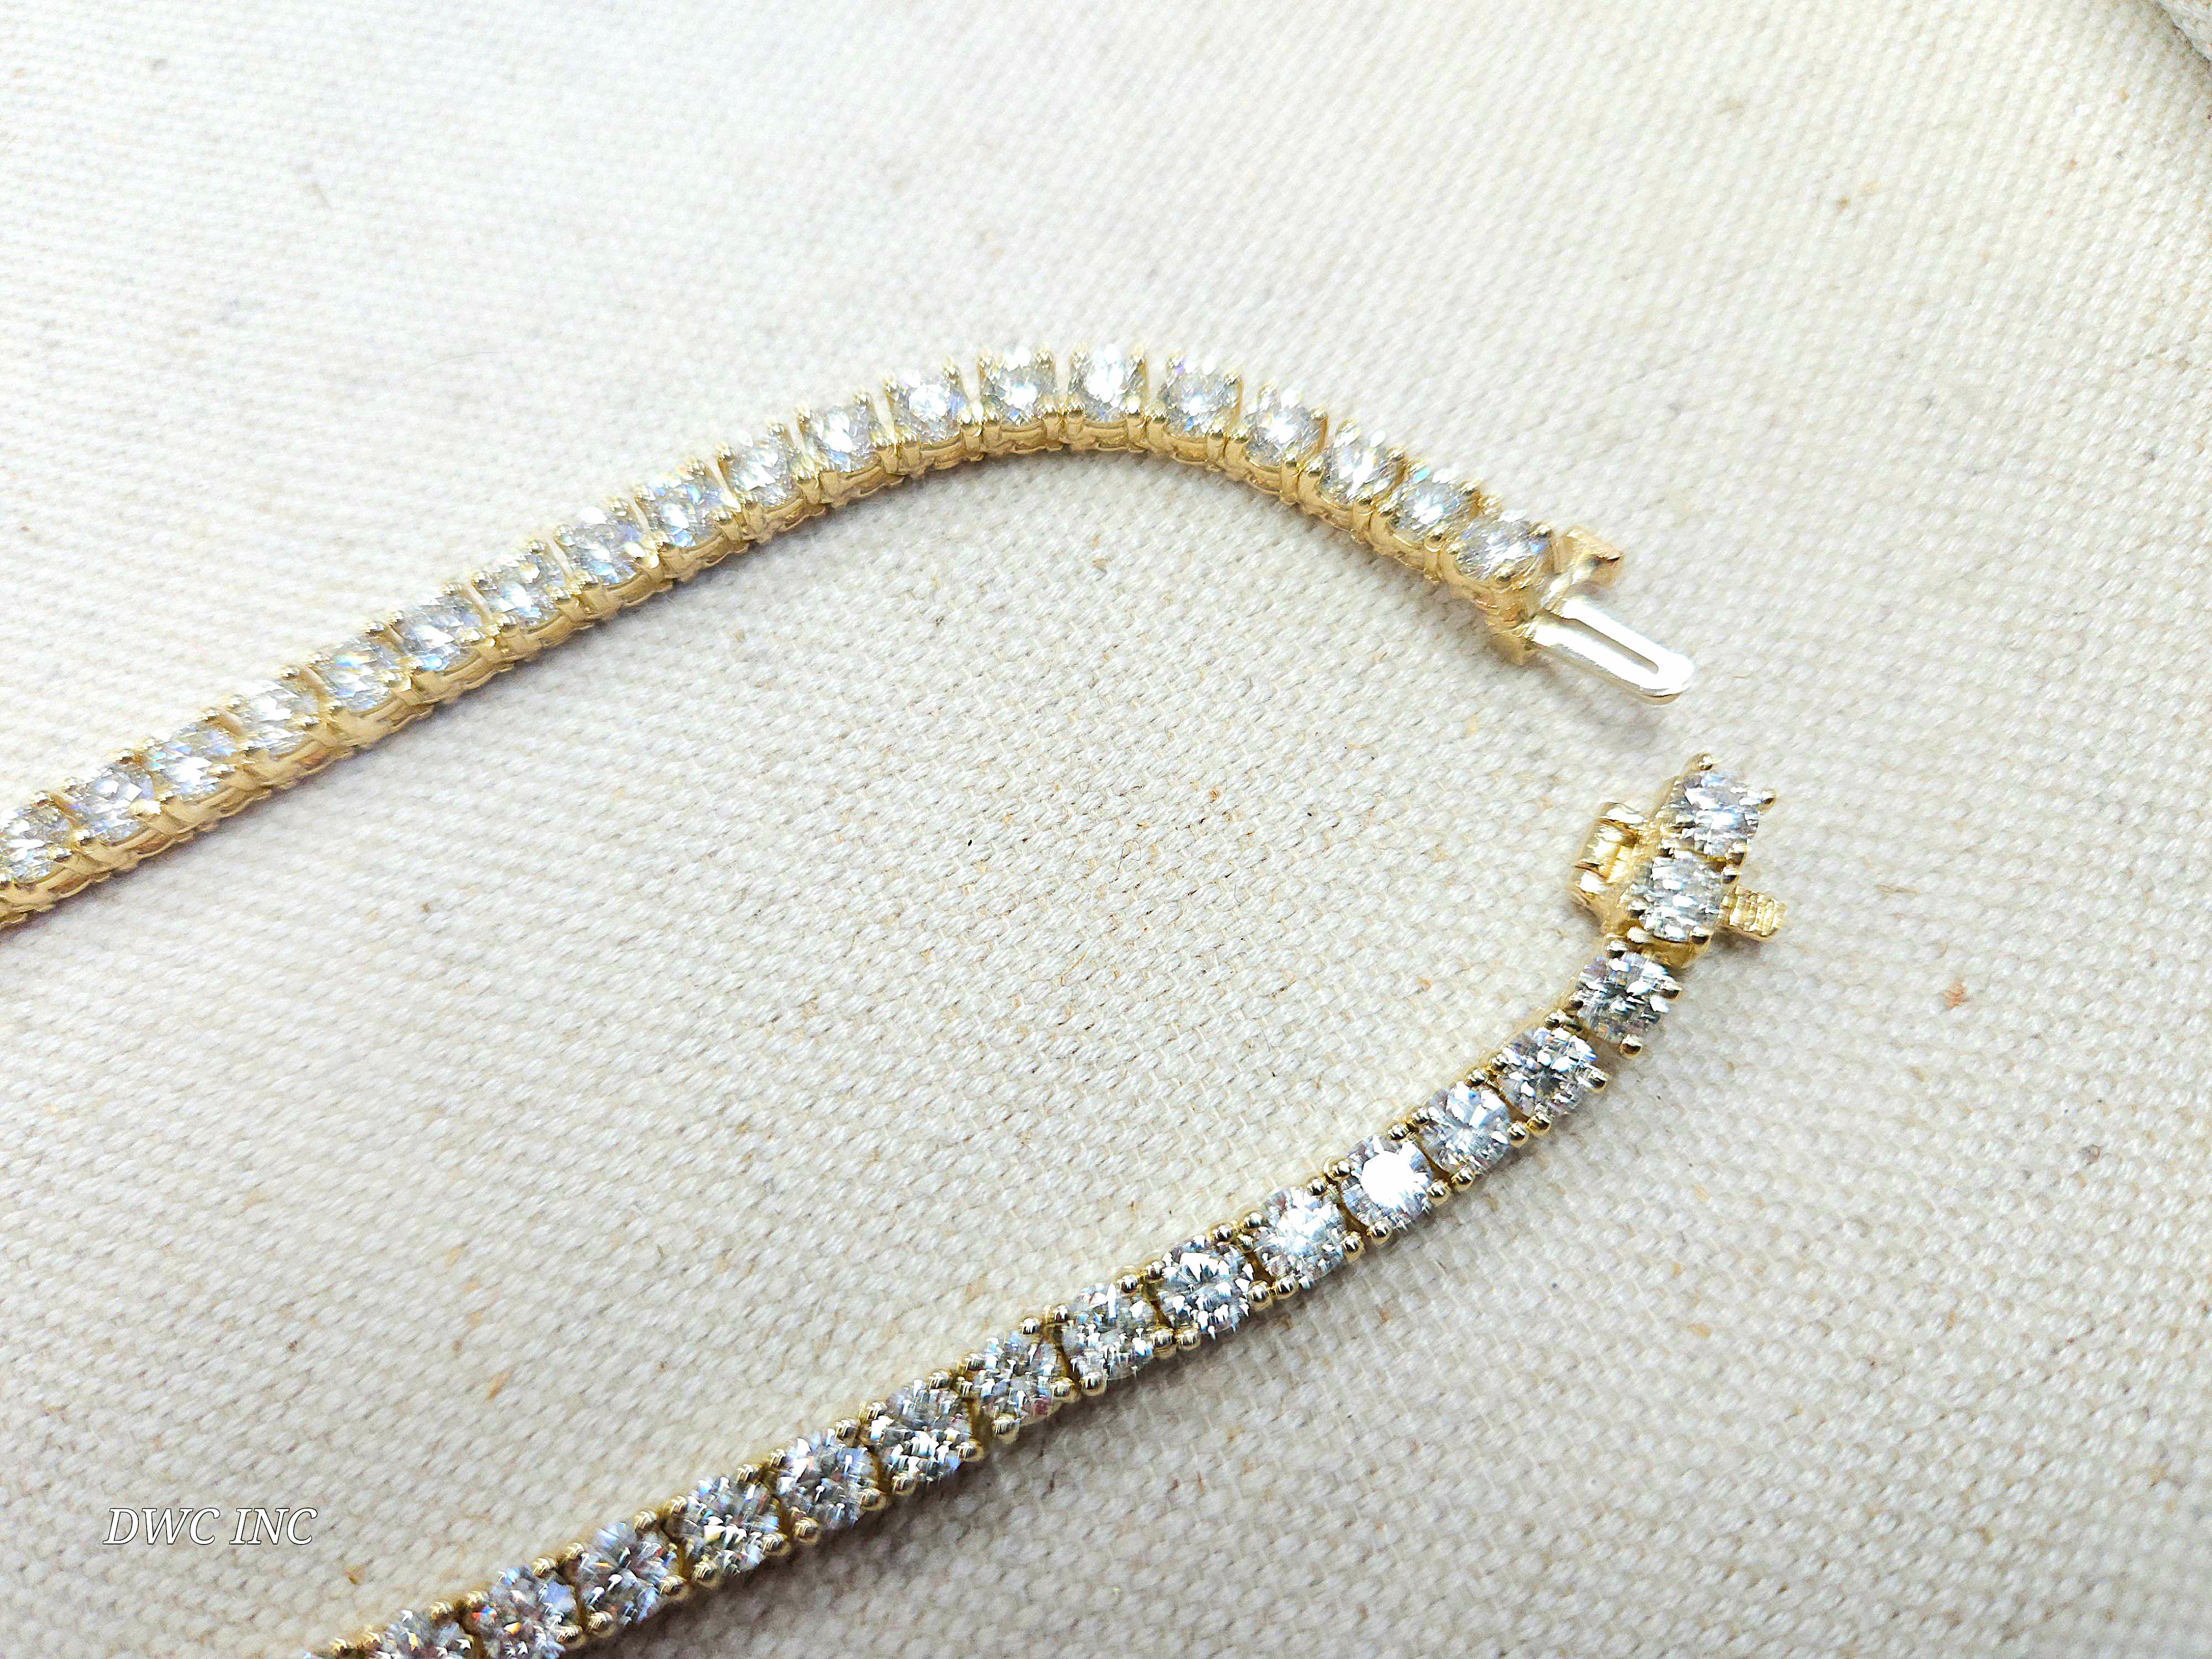 High beautiful quality tennis necklace, round-brilliant cut white diamonds clean and Excellent shine. 
14k yellow gold classic four-prong style for maximum light brilliance. 
20 inch length. Average Color H, Clarity VVS-VS, 3.6 mm wide.

Free